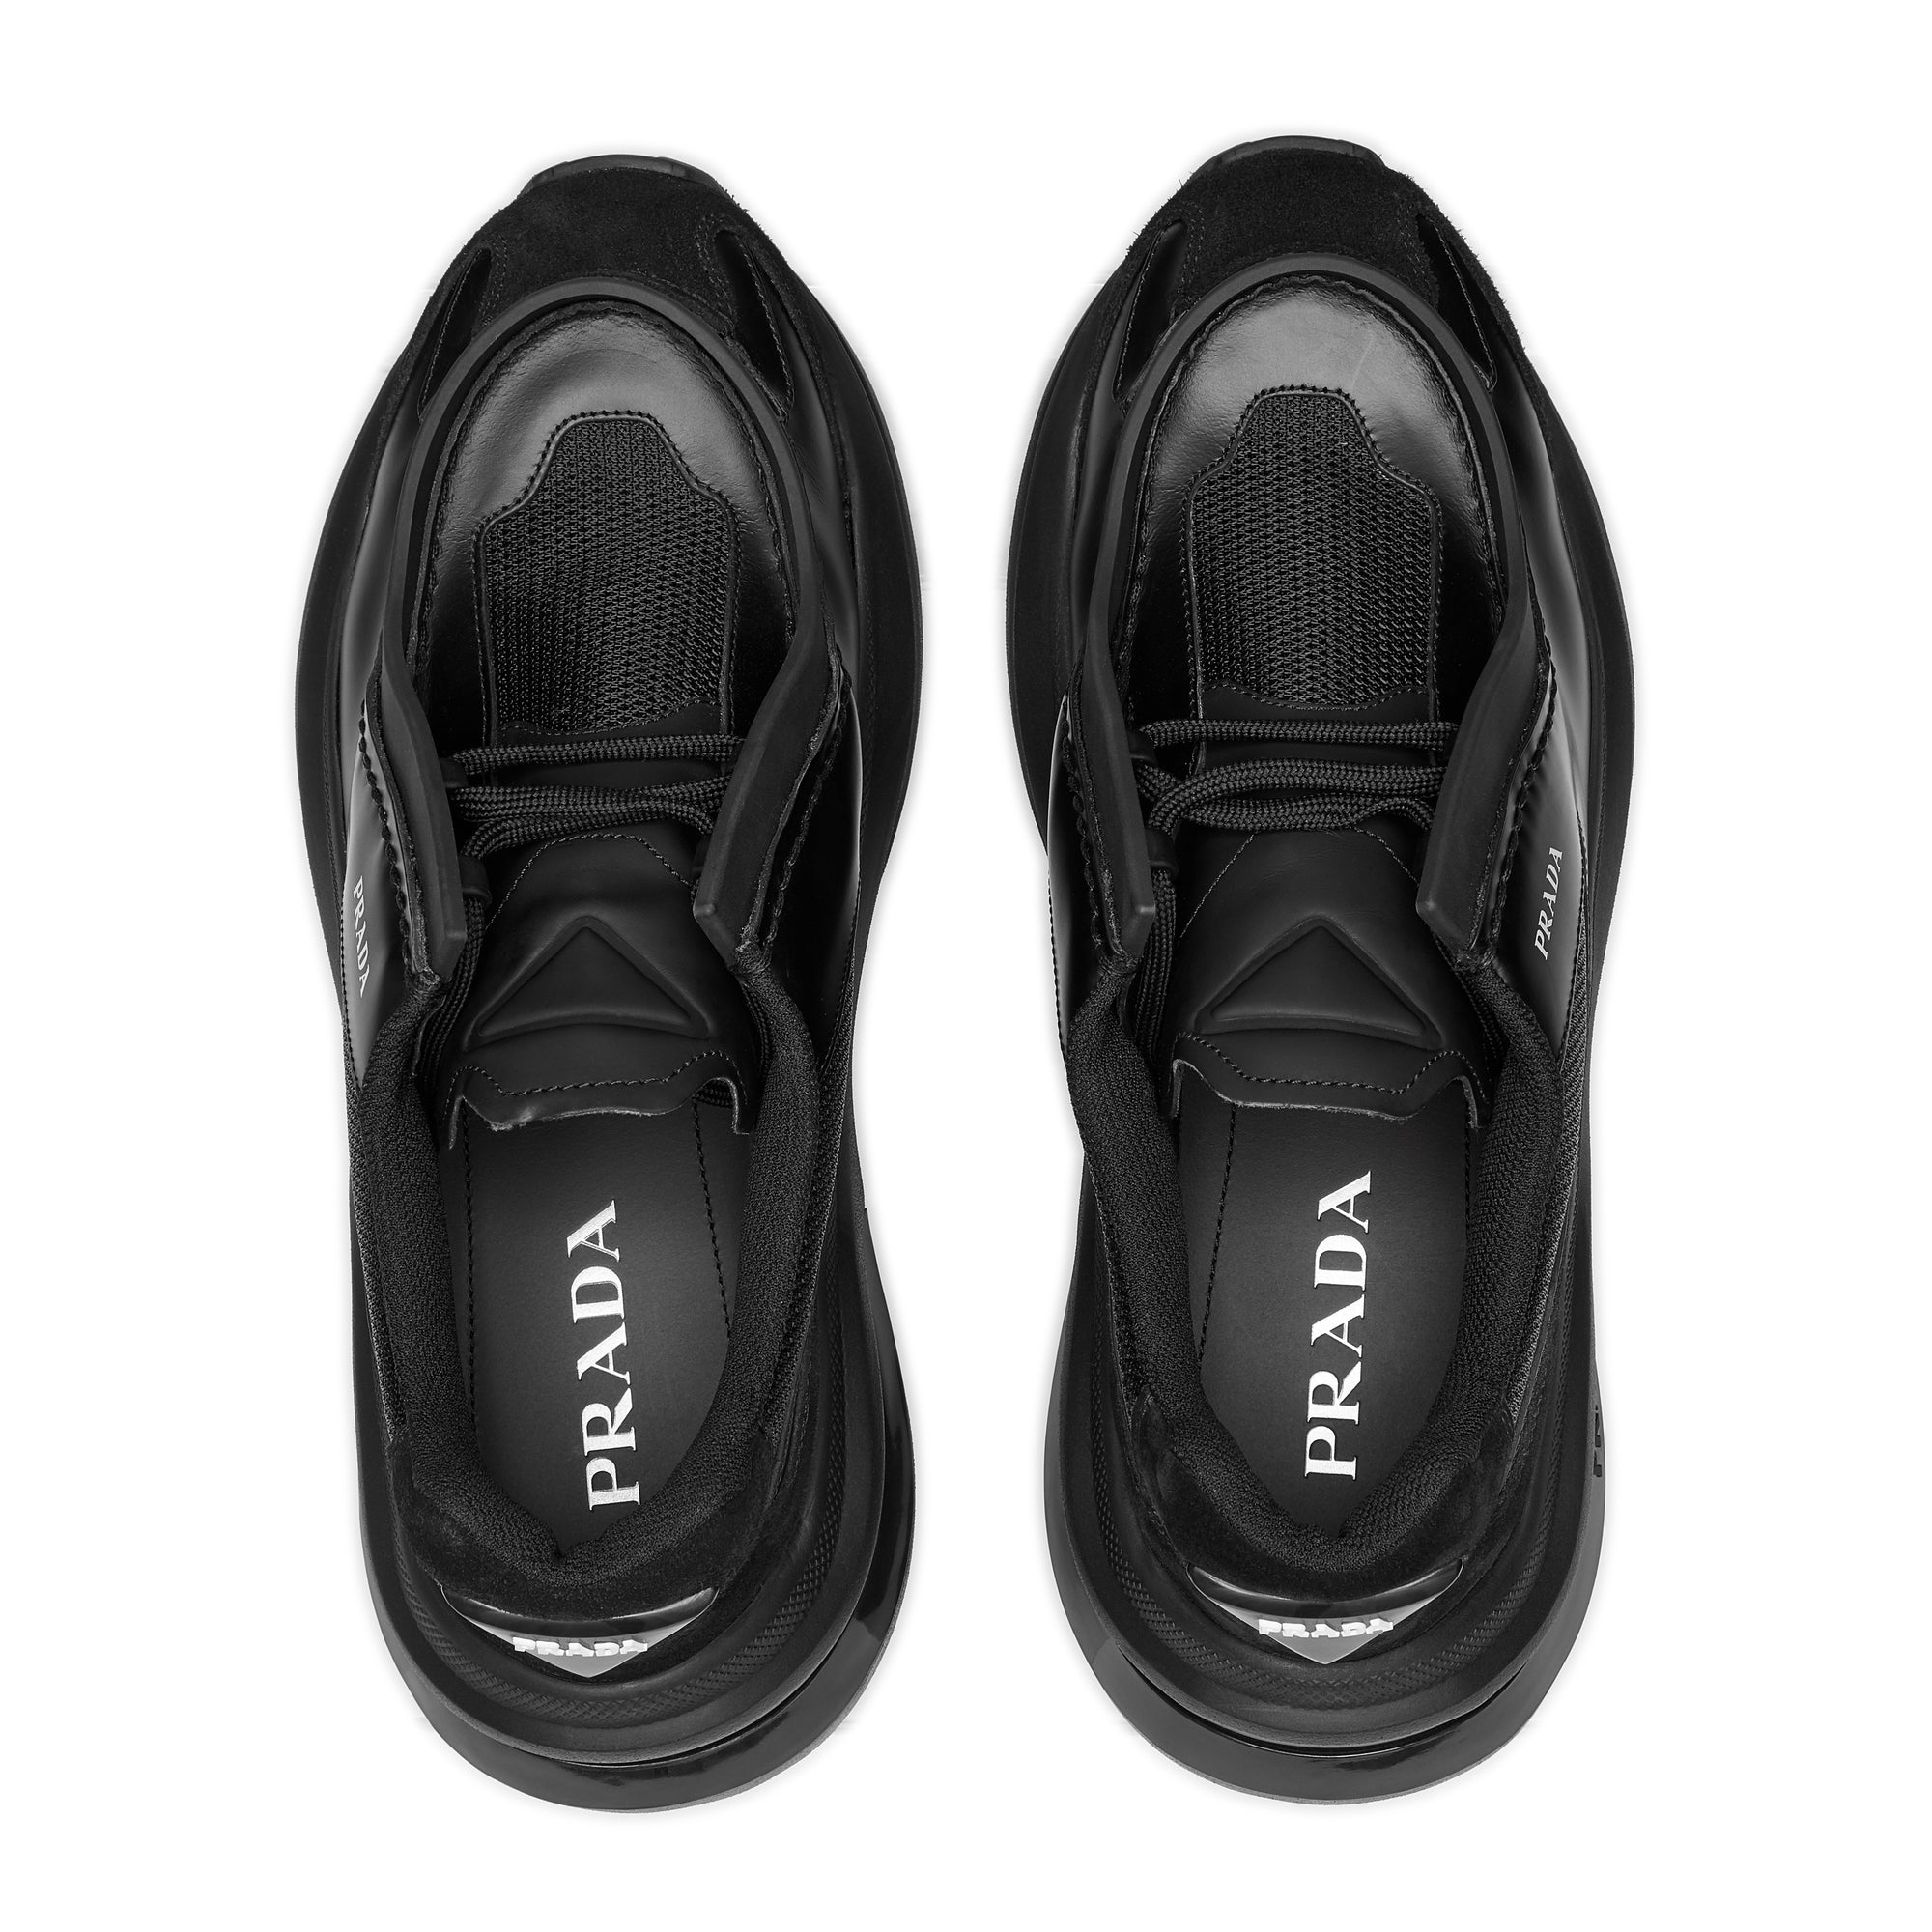 Prada - Men's Systeme Brushed Leather Sneakers - (Nero) – DSMNY E-SHOP